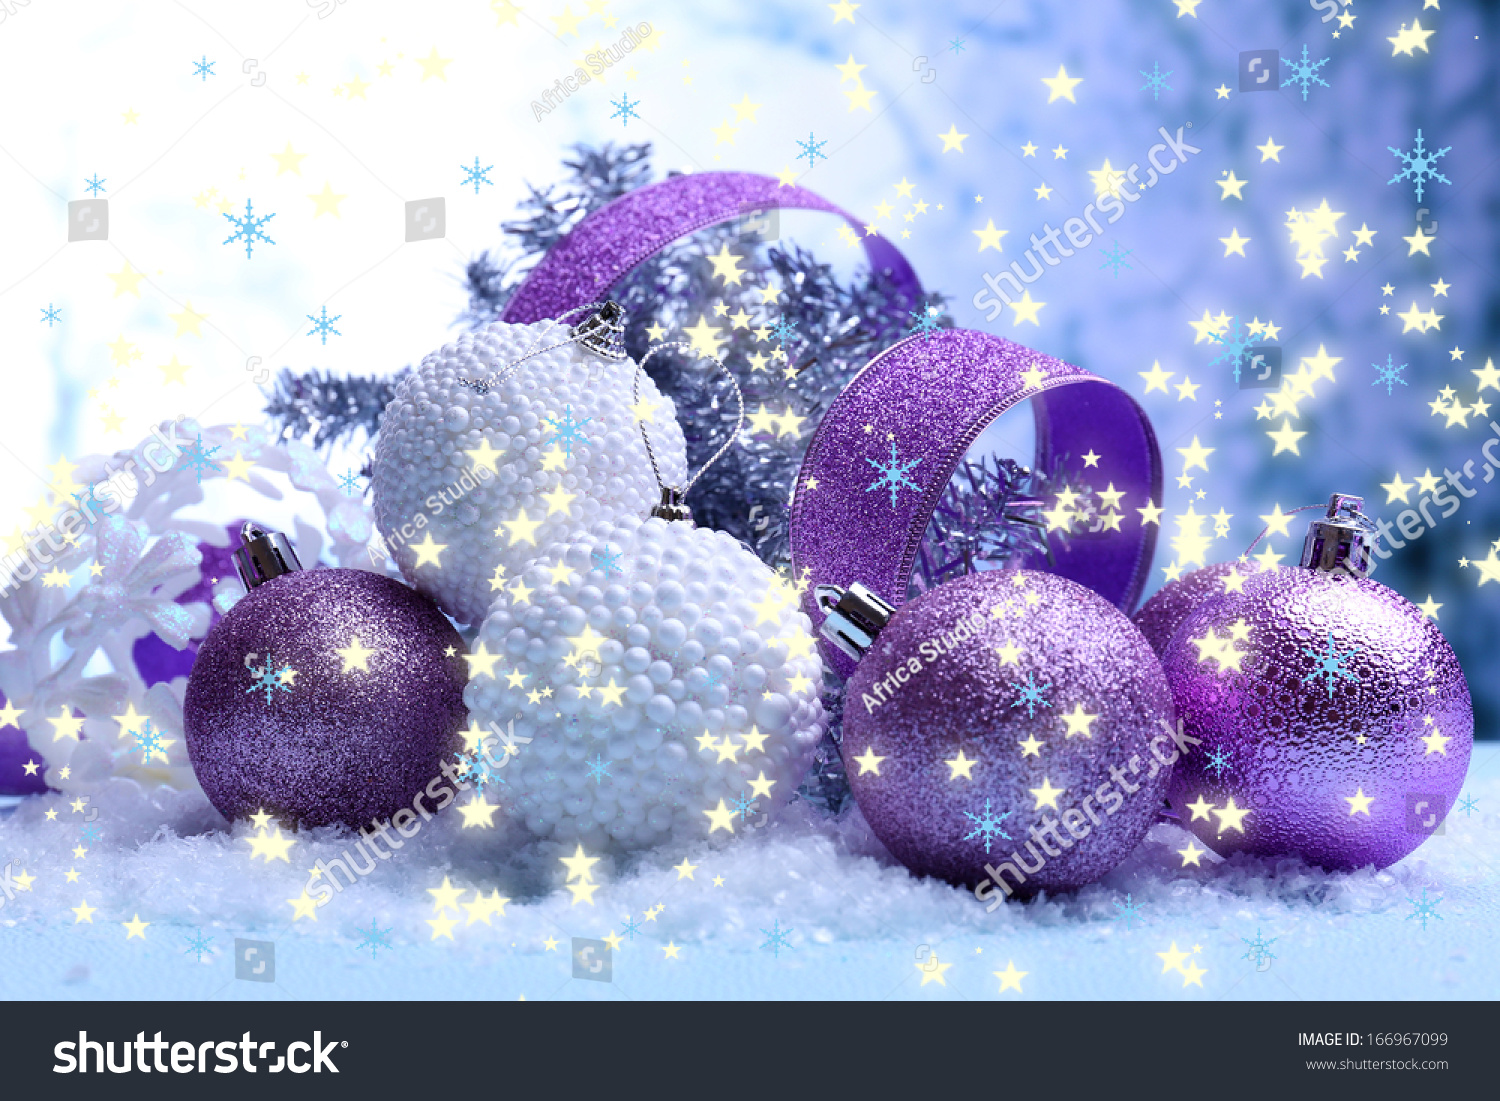 9,679 Branch sparkling spheres Images, Stock Photos & Vectors ...